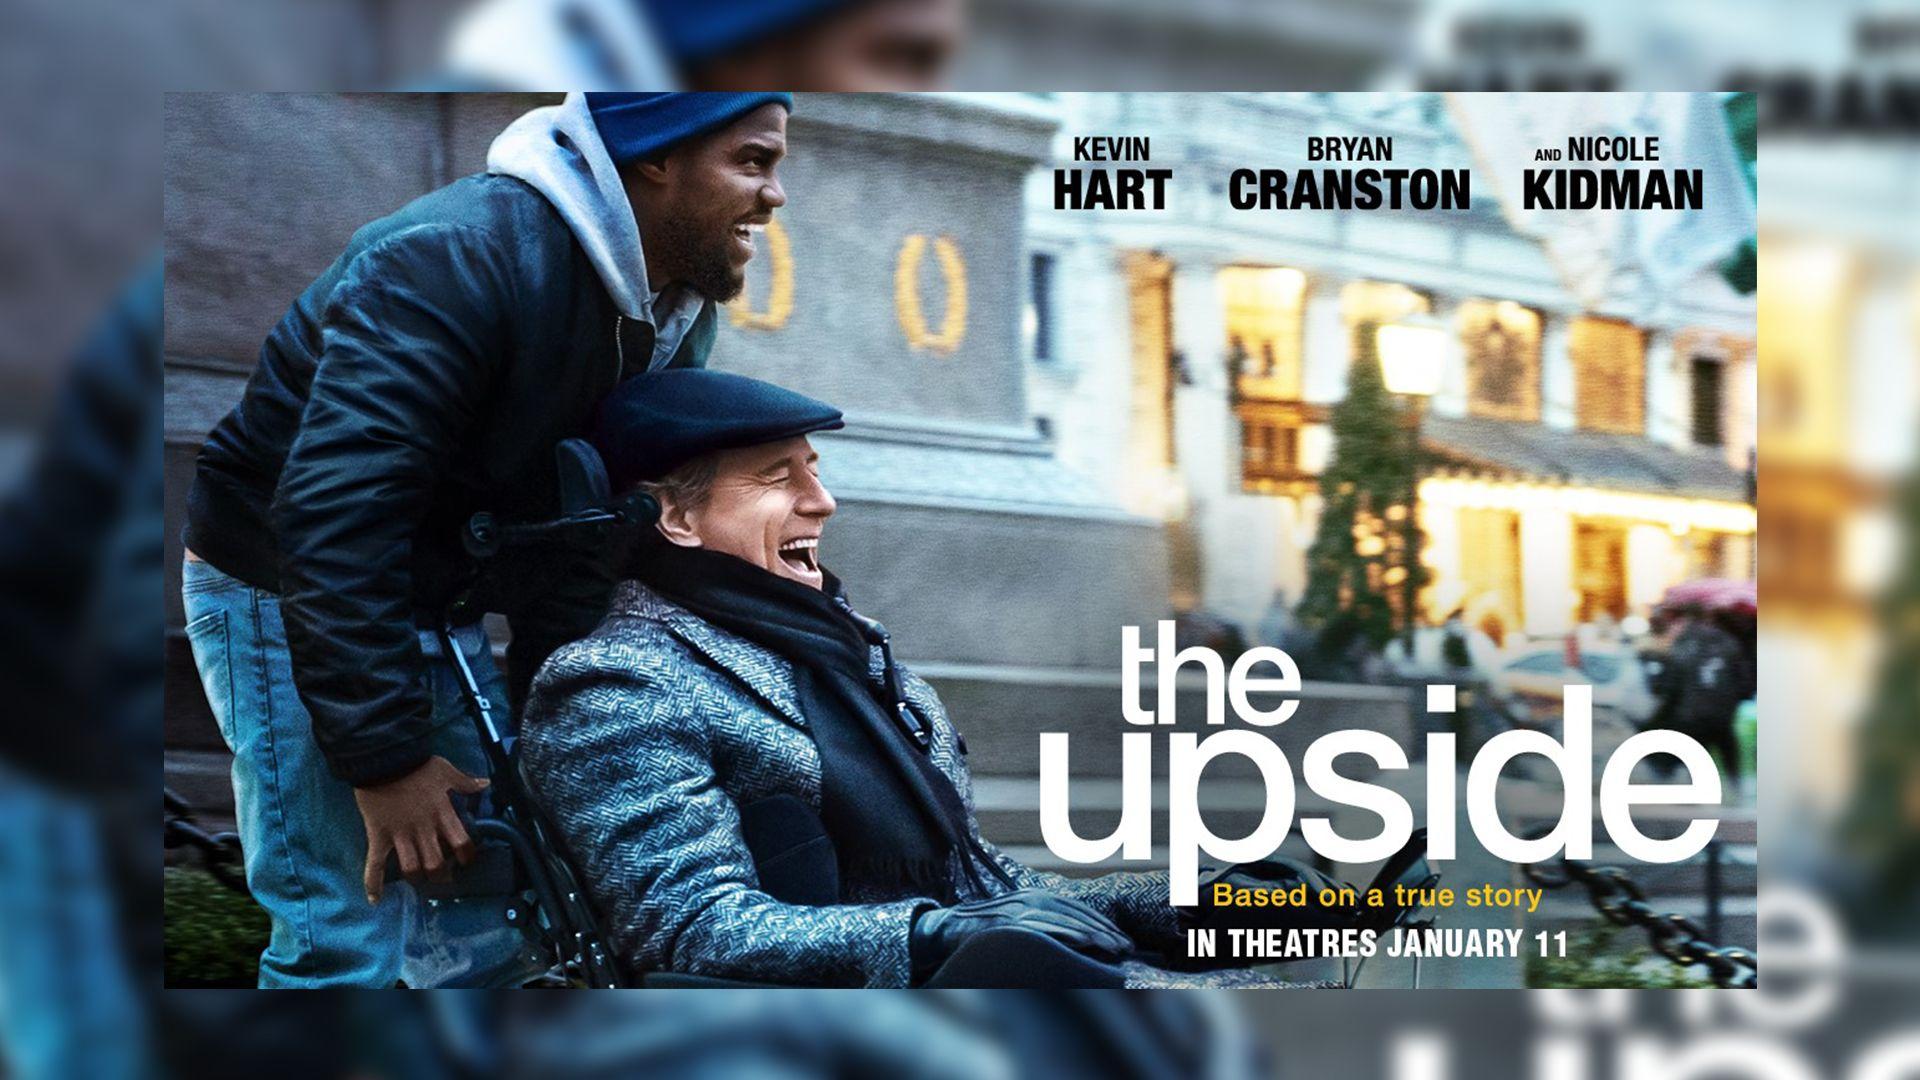 The Upside” in Theaters January 2019